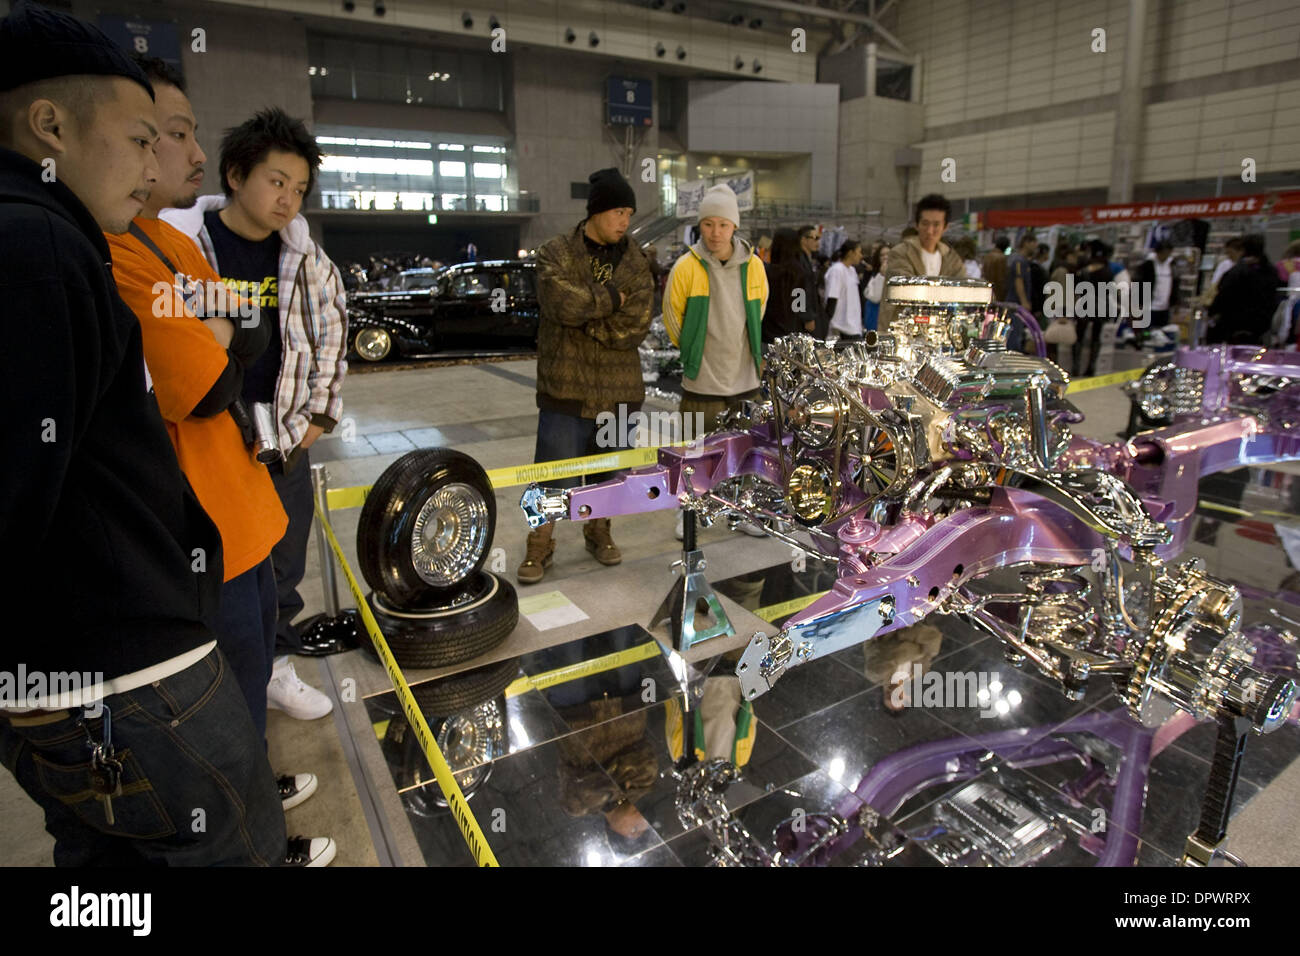 Nov 25, 2008 - Chiba, Japan - Customized classic cars showcasing the American lowrider culture are displayed at the Lowrider Japan Car Show which took place at Makuhari Messe Convention Center in Chiba, Japan. Pictured: Japanese fans look at a customized engine and car chassis. (Credit Image: © Christopher Jue/ZUMA Press) Stock Photo